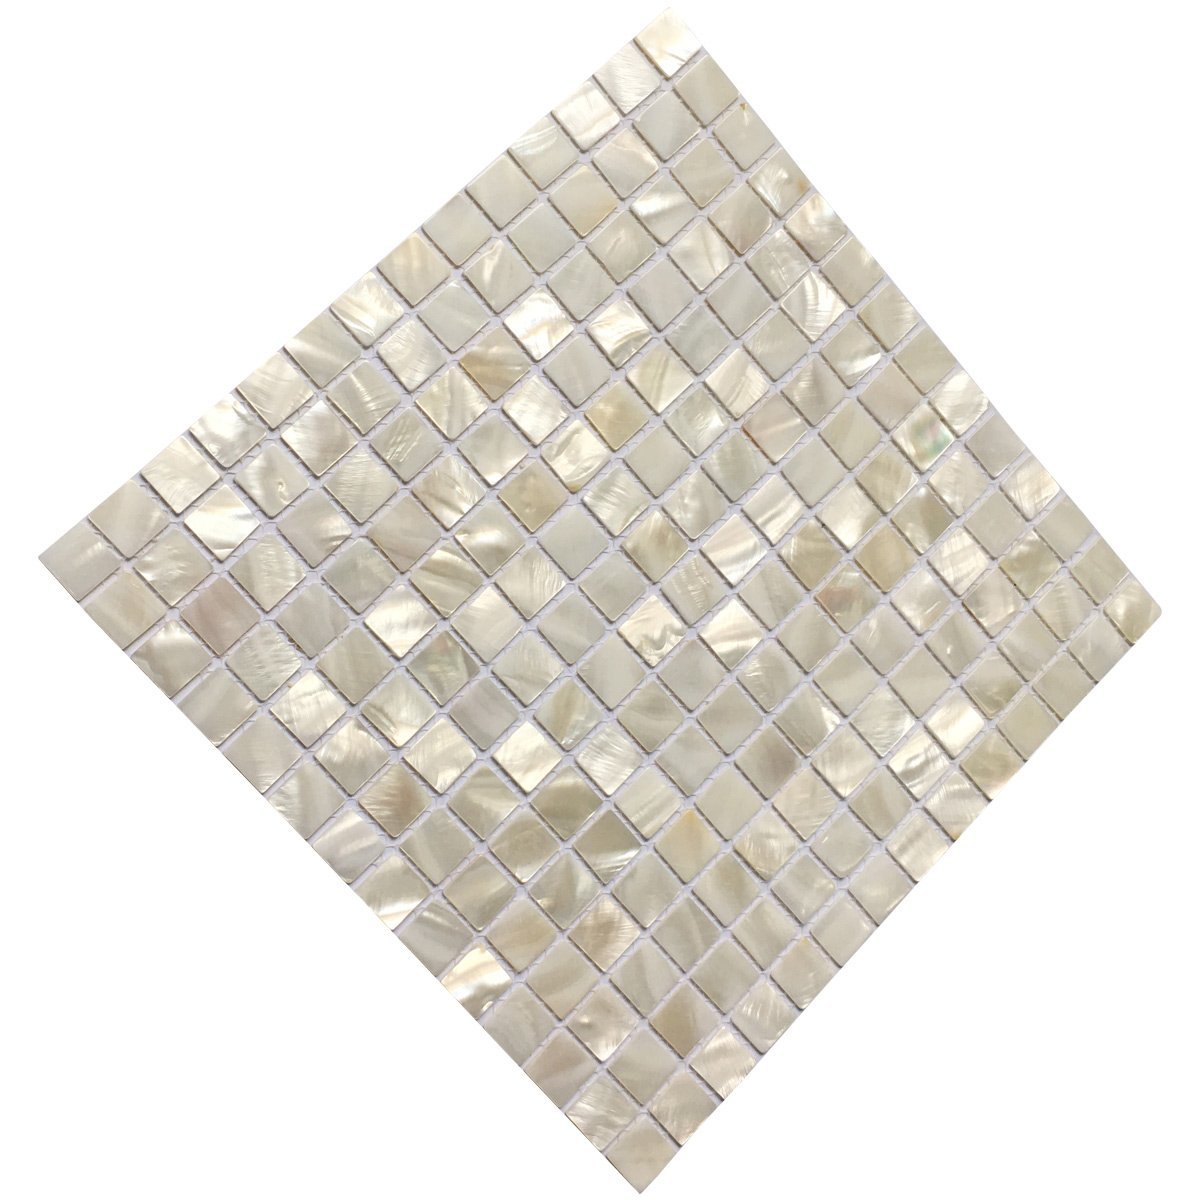 Art3d Oyster Mother of Pearl Square Shell Mosaic Kitchen Tiles for Kitchen Backsplashes, Bathroom Walls, Spas, Pools 12" X 12" Pack of 6